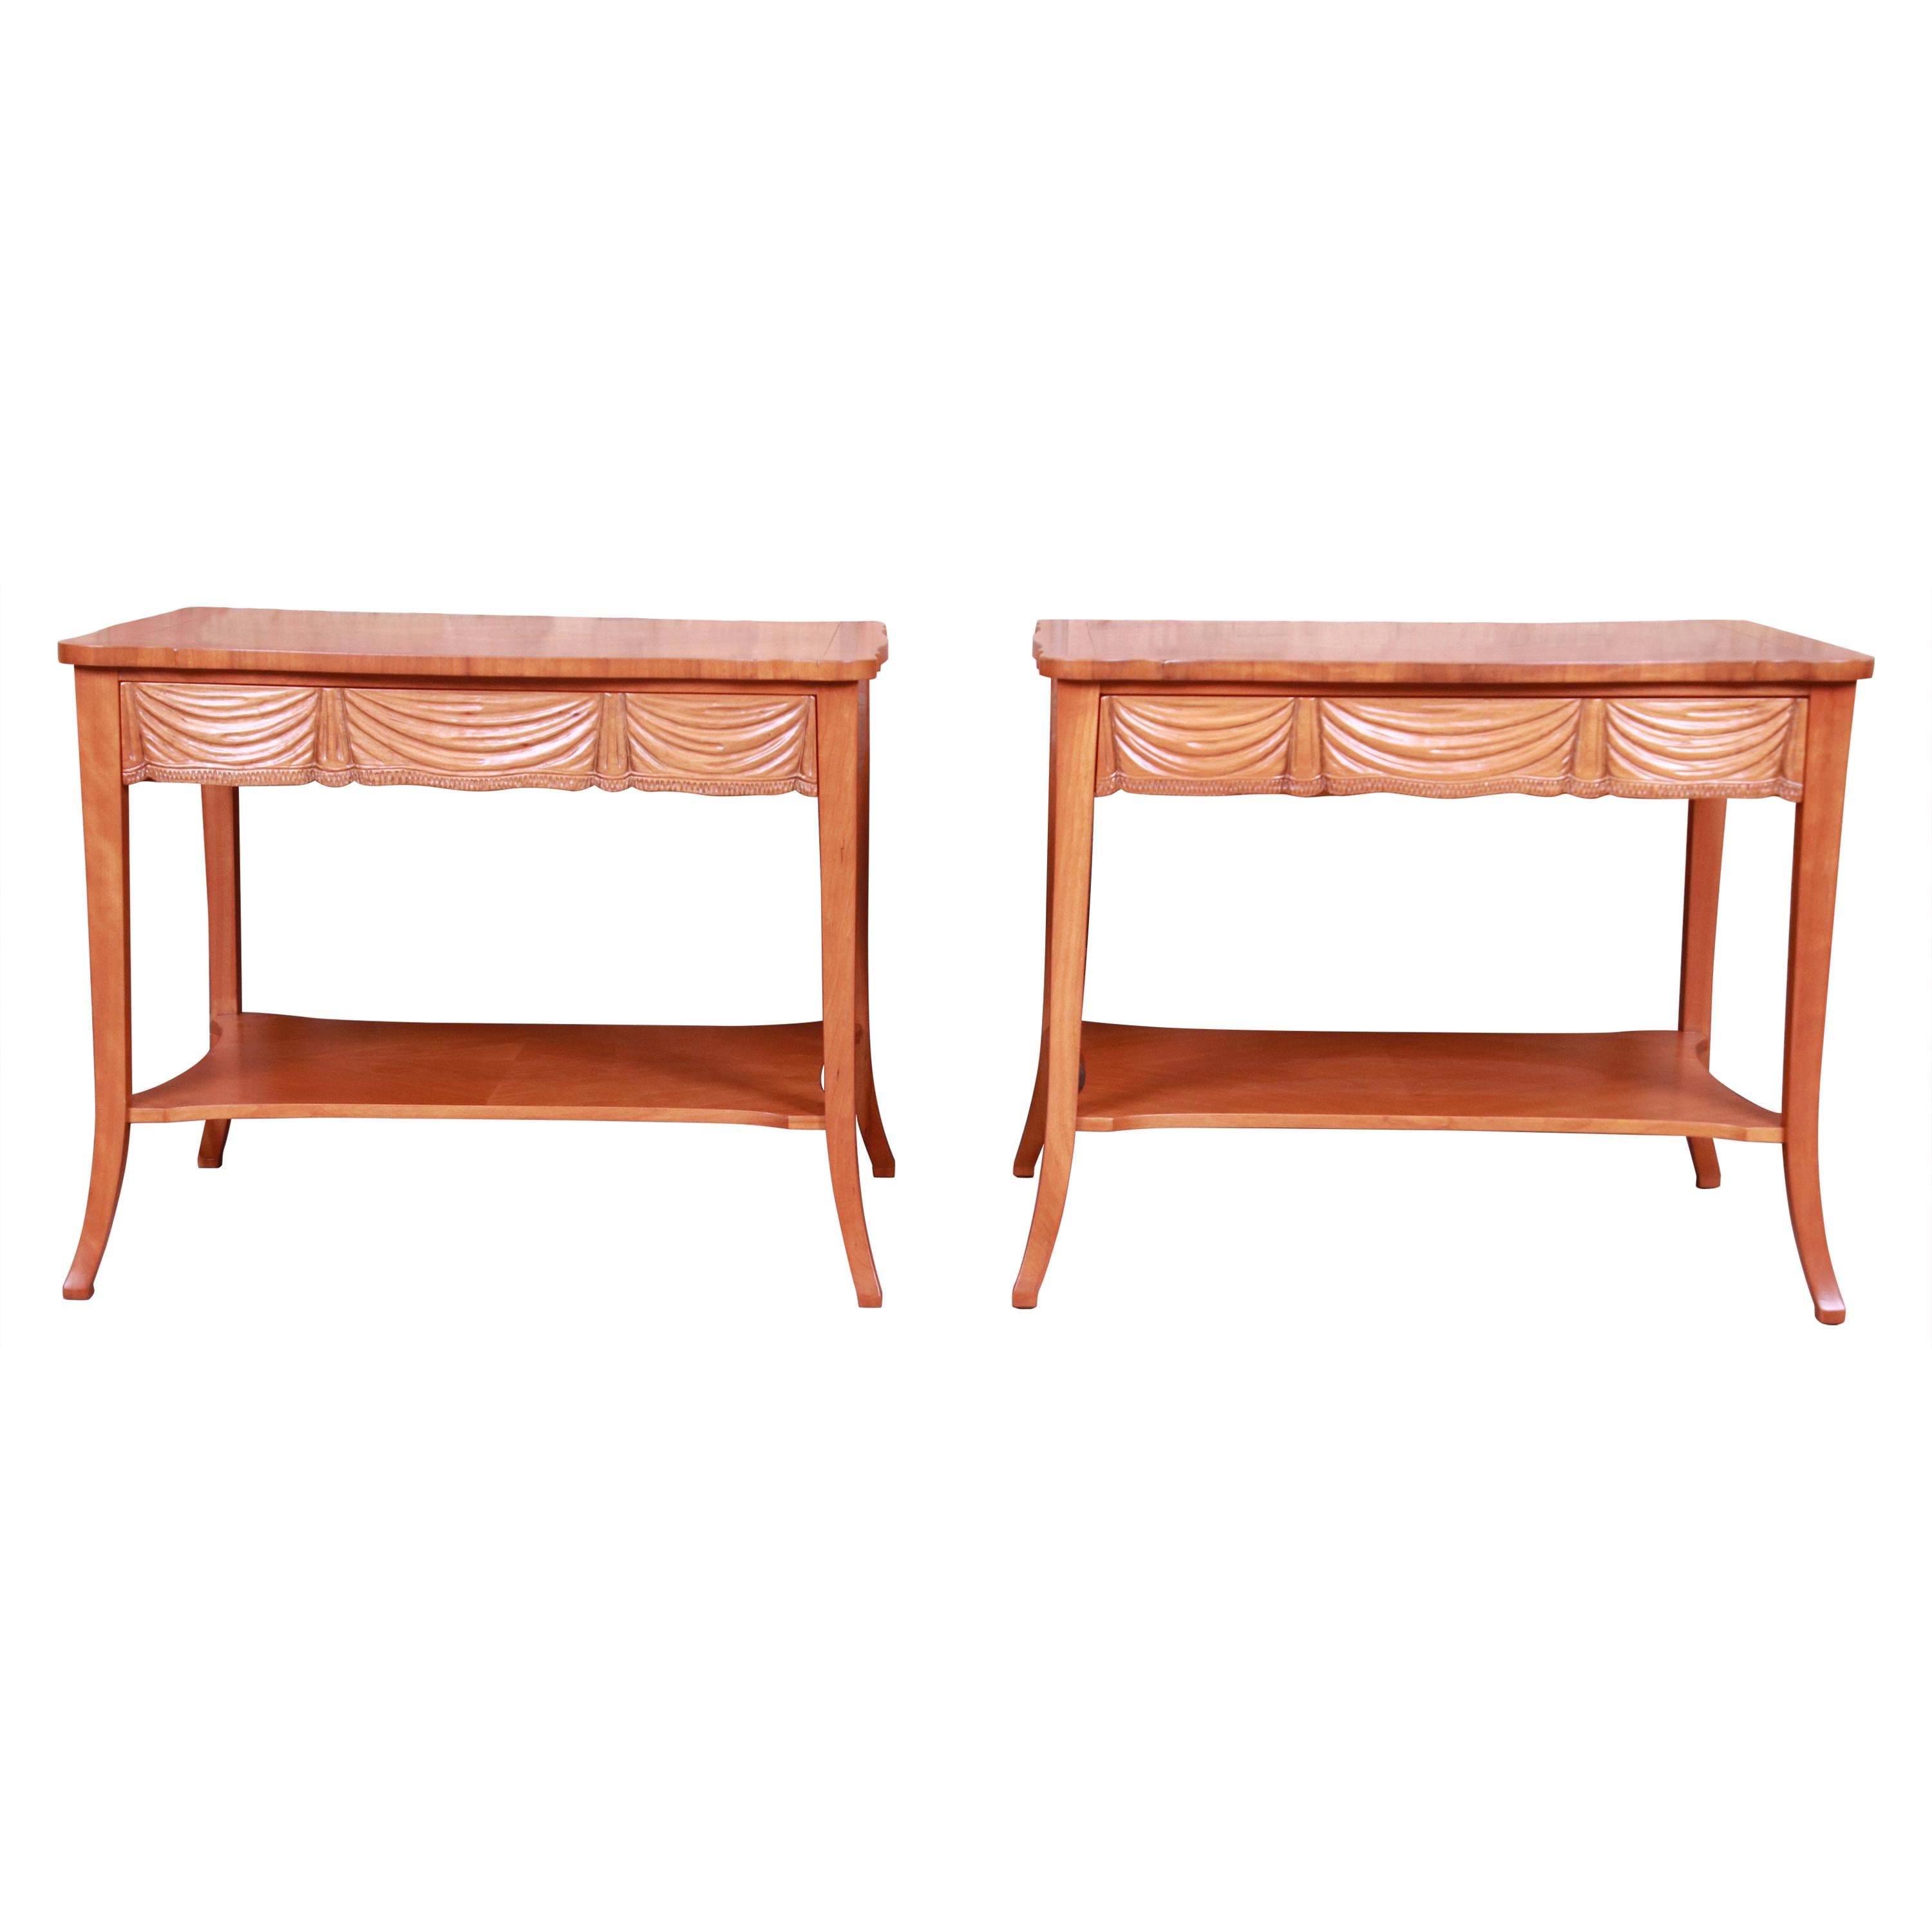 Baker Furniture Trompe L'Oeil Draped Front Cherry Wood Bedside Tables, Pair